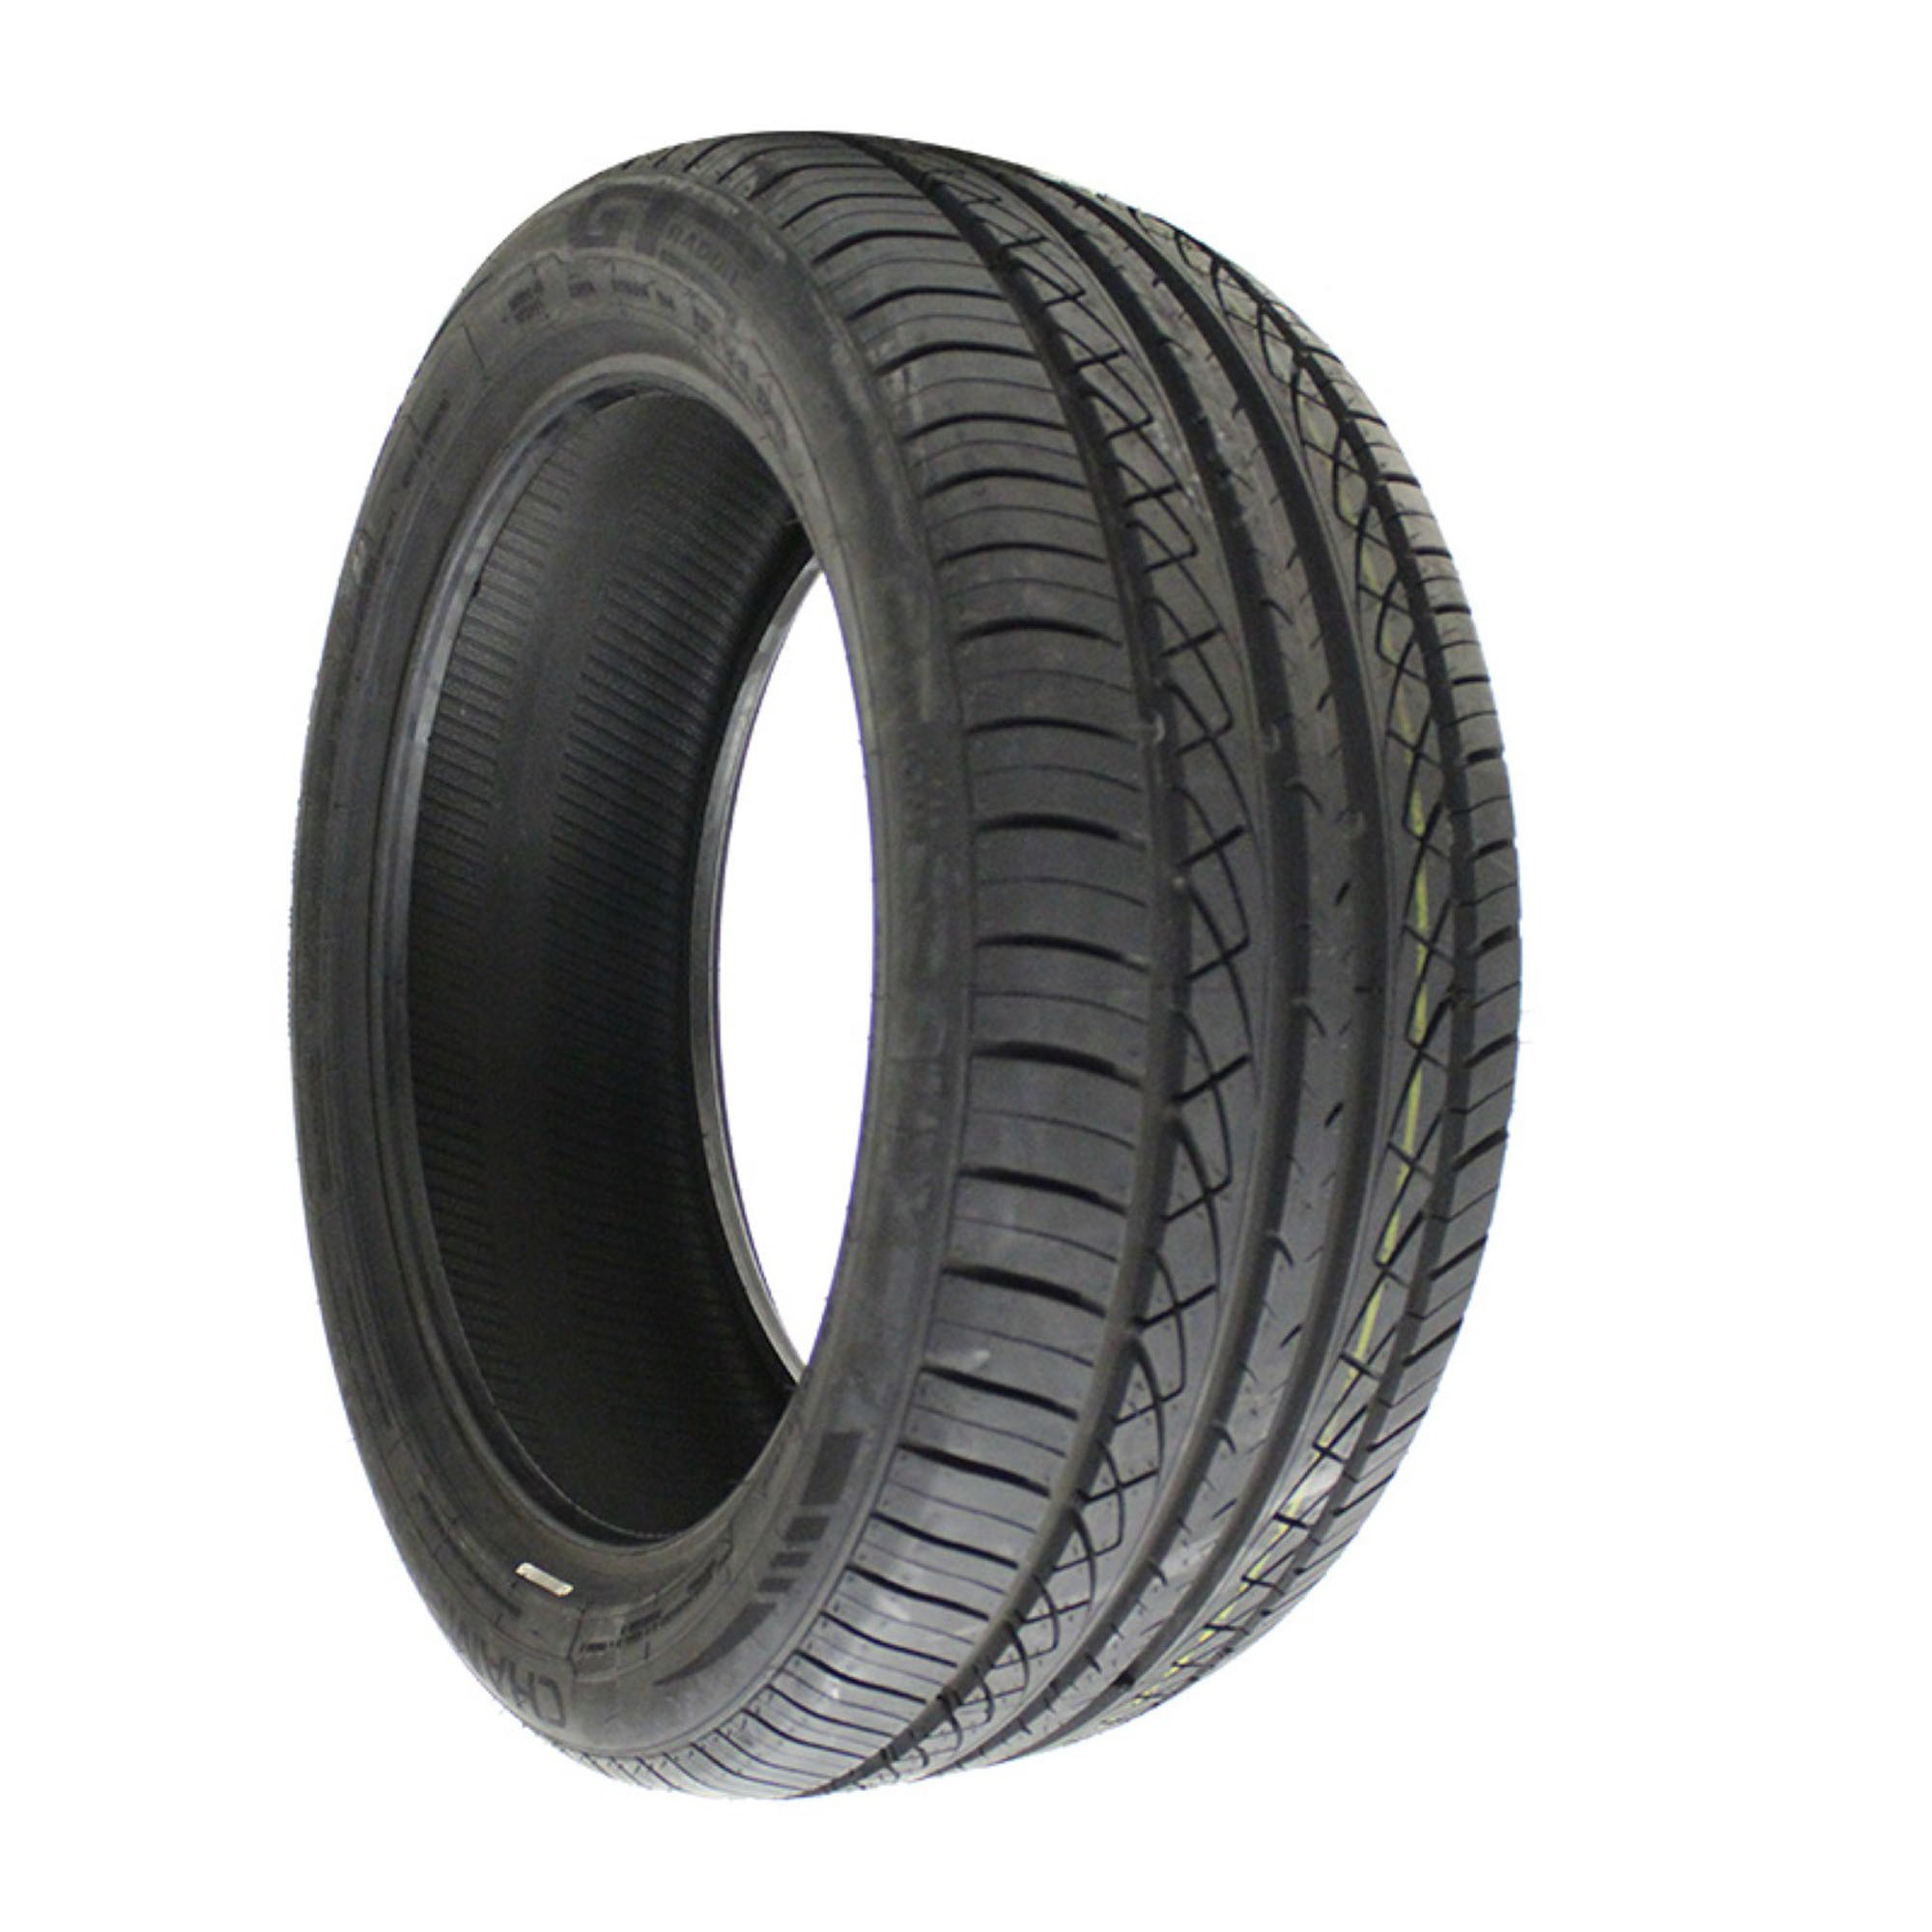 GT Radial Champiro UHP A/S UHP All Season 225/50ZR18 95W Passenger Tire - image 5 of 6